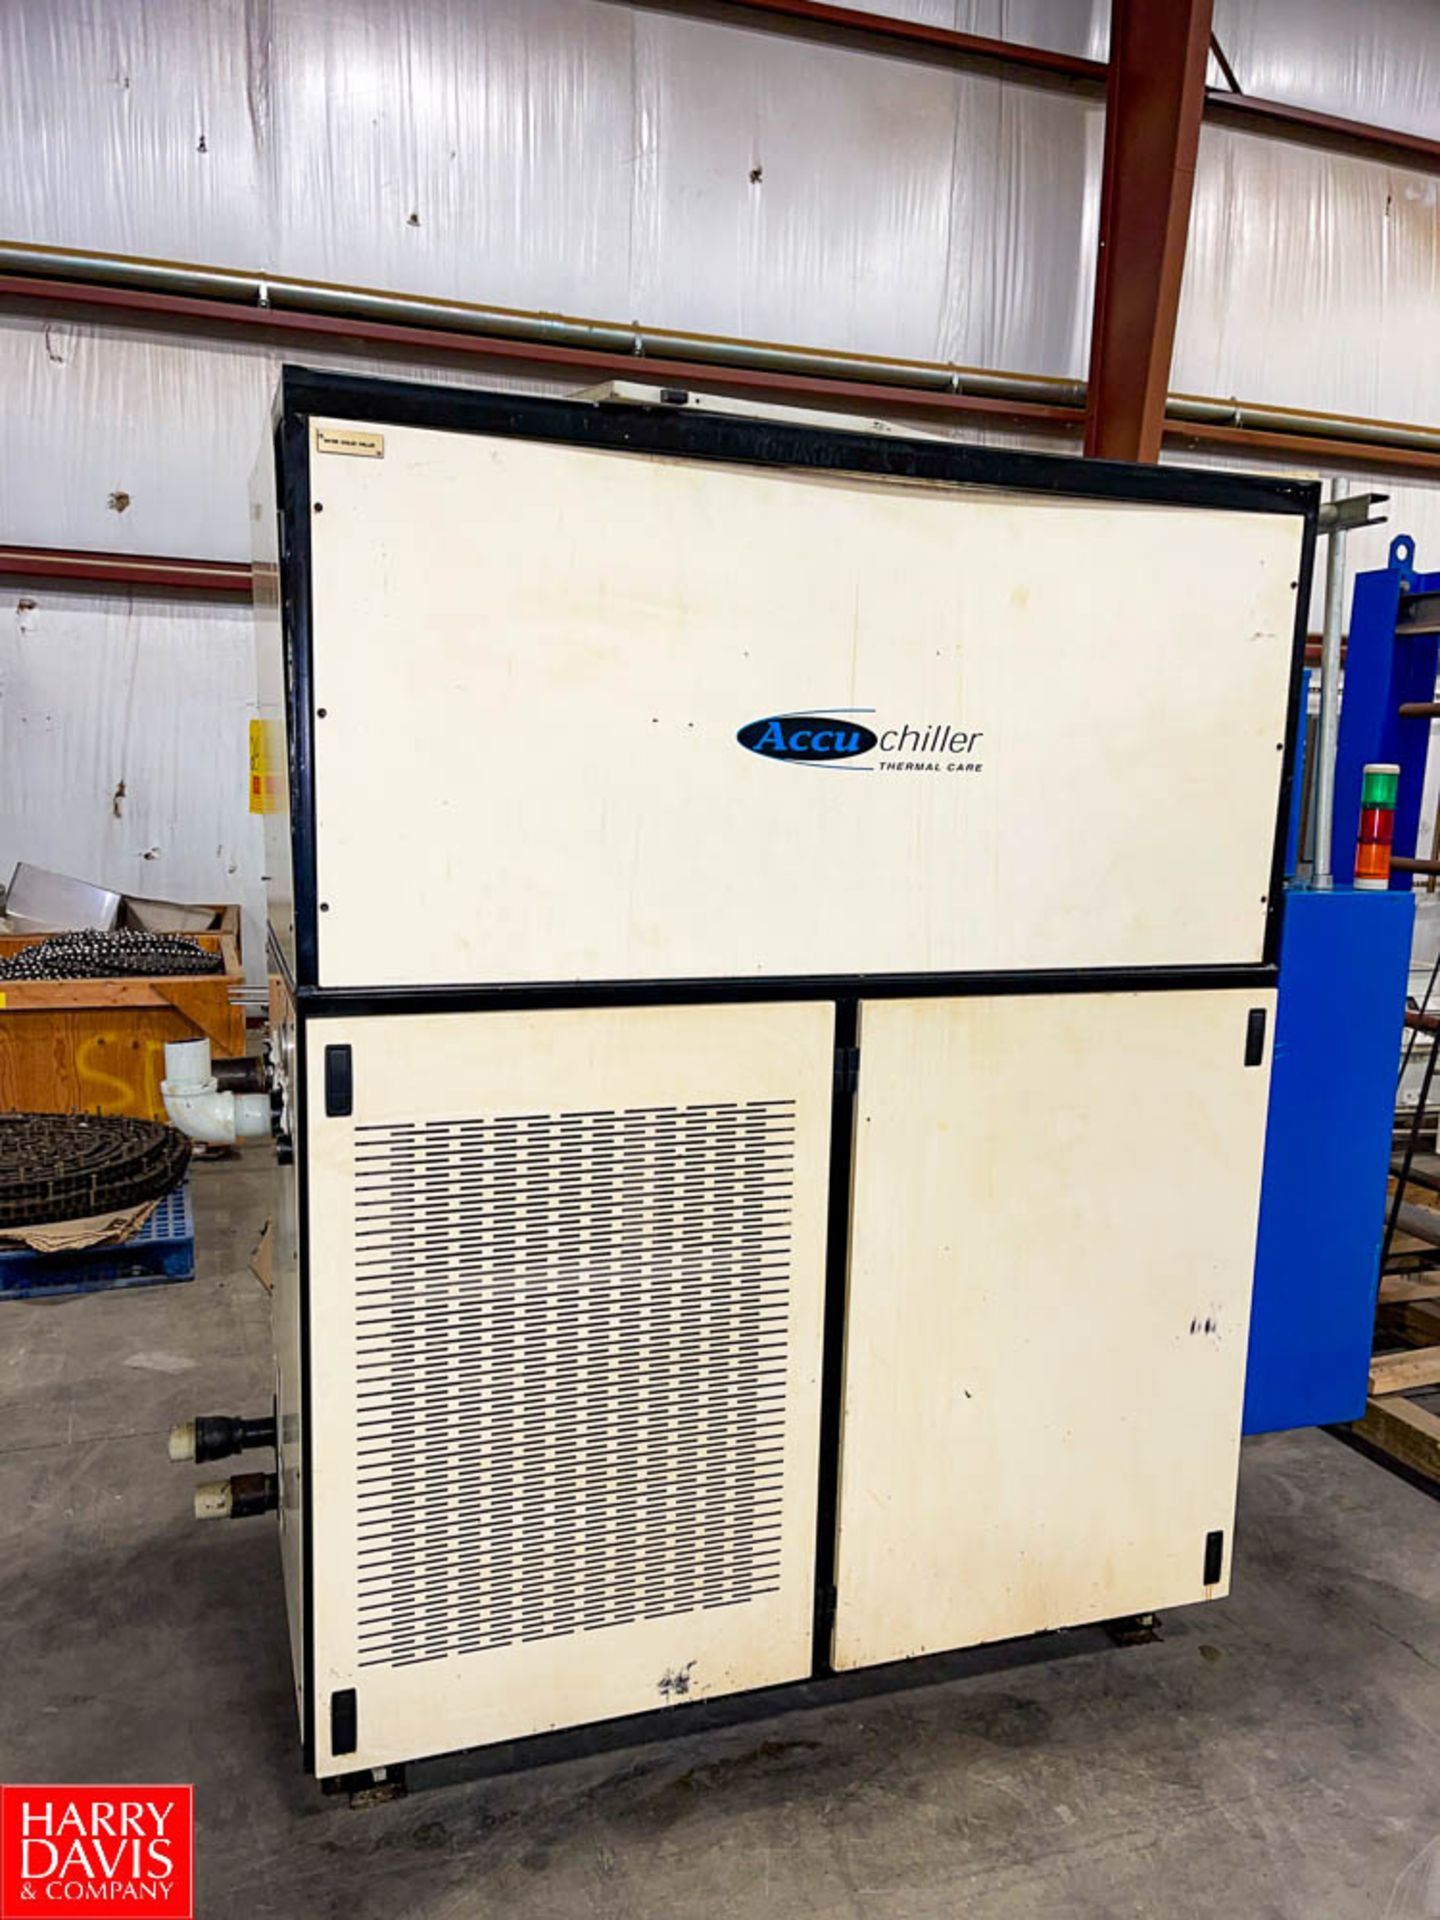 Thermal Care Accuchiller, Model: LQ2W1504X, S/N 0832501071Location: Fleetwood, PA Rigging Fee: $